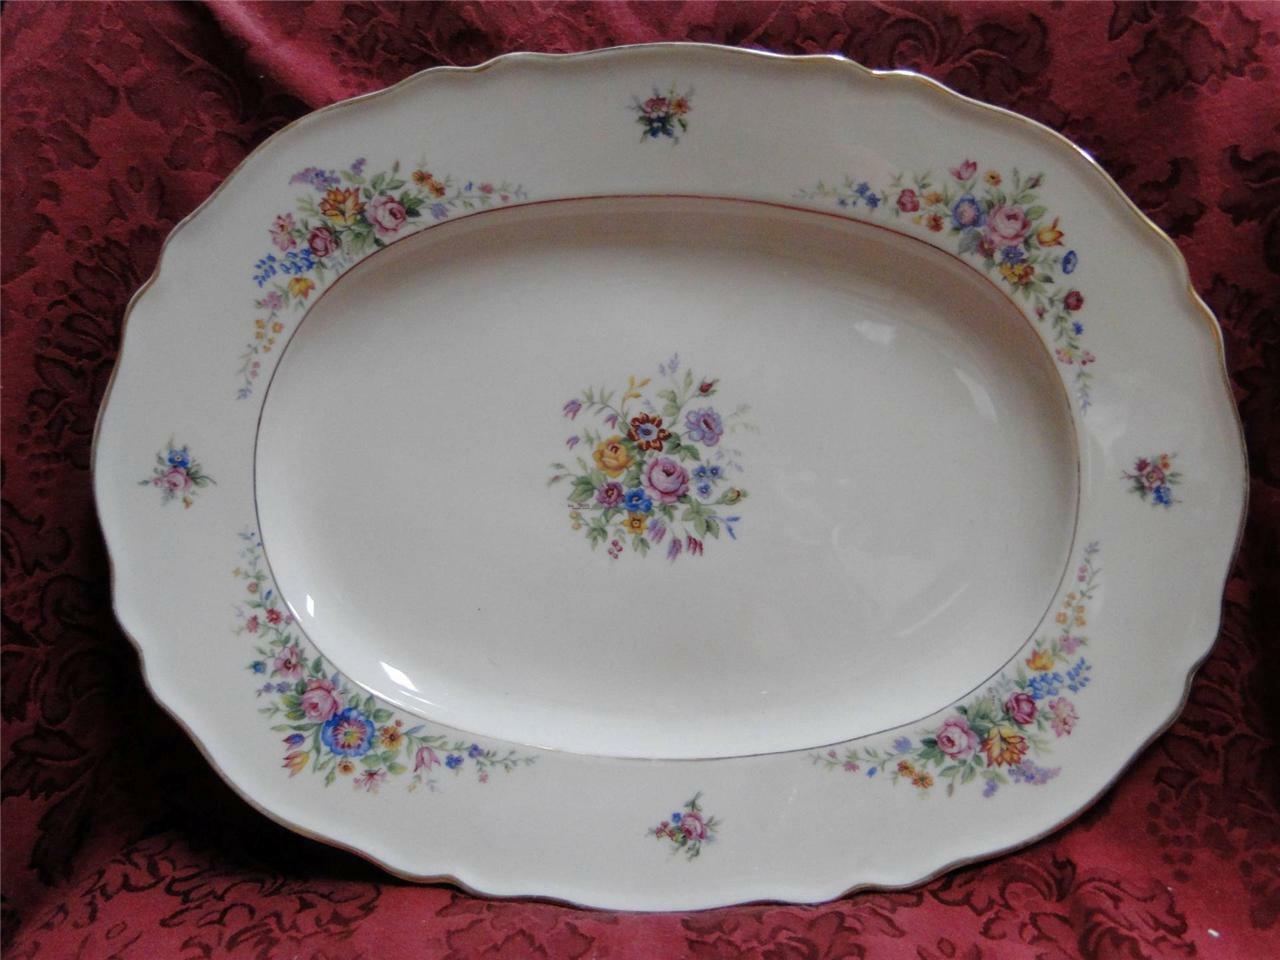 Krautheim/Franconia Lakme, Floral, Scallop, Ivory: Oval Platter, 15 1/2"